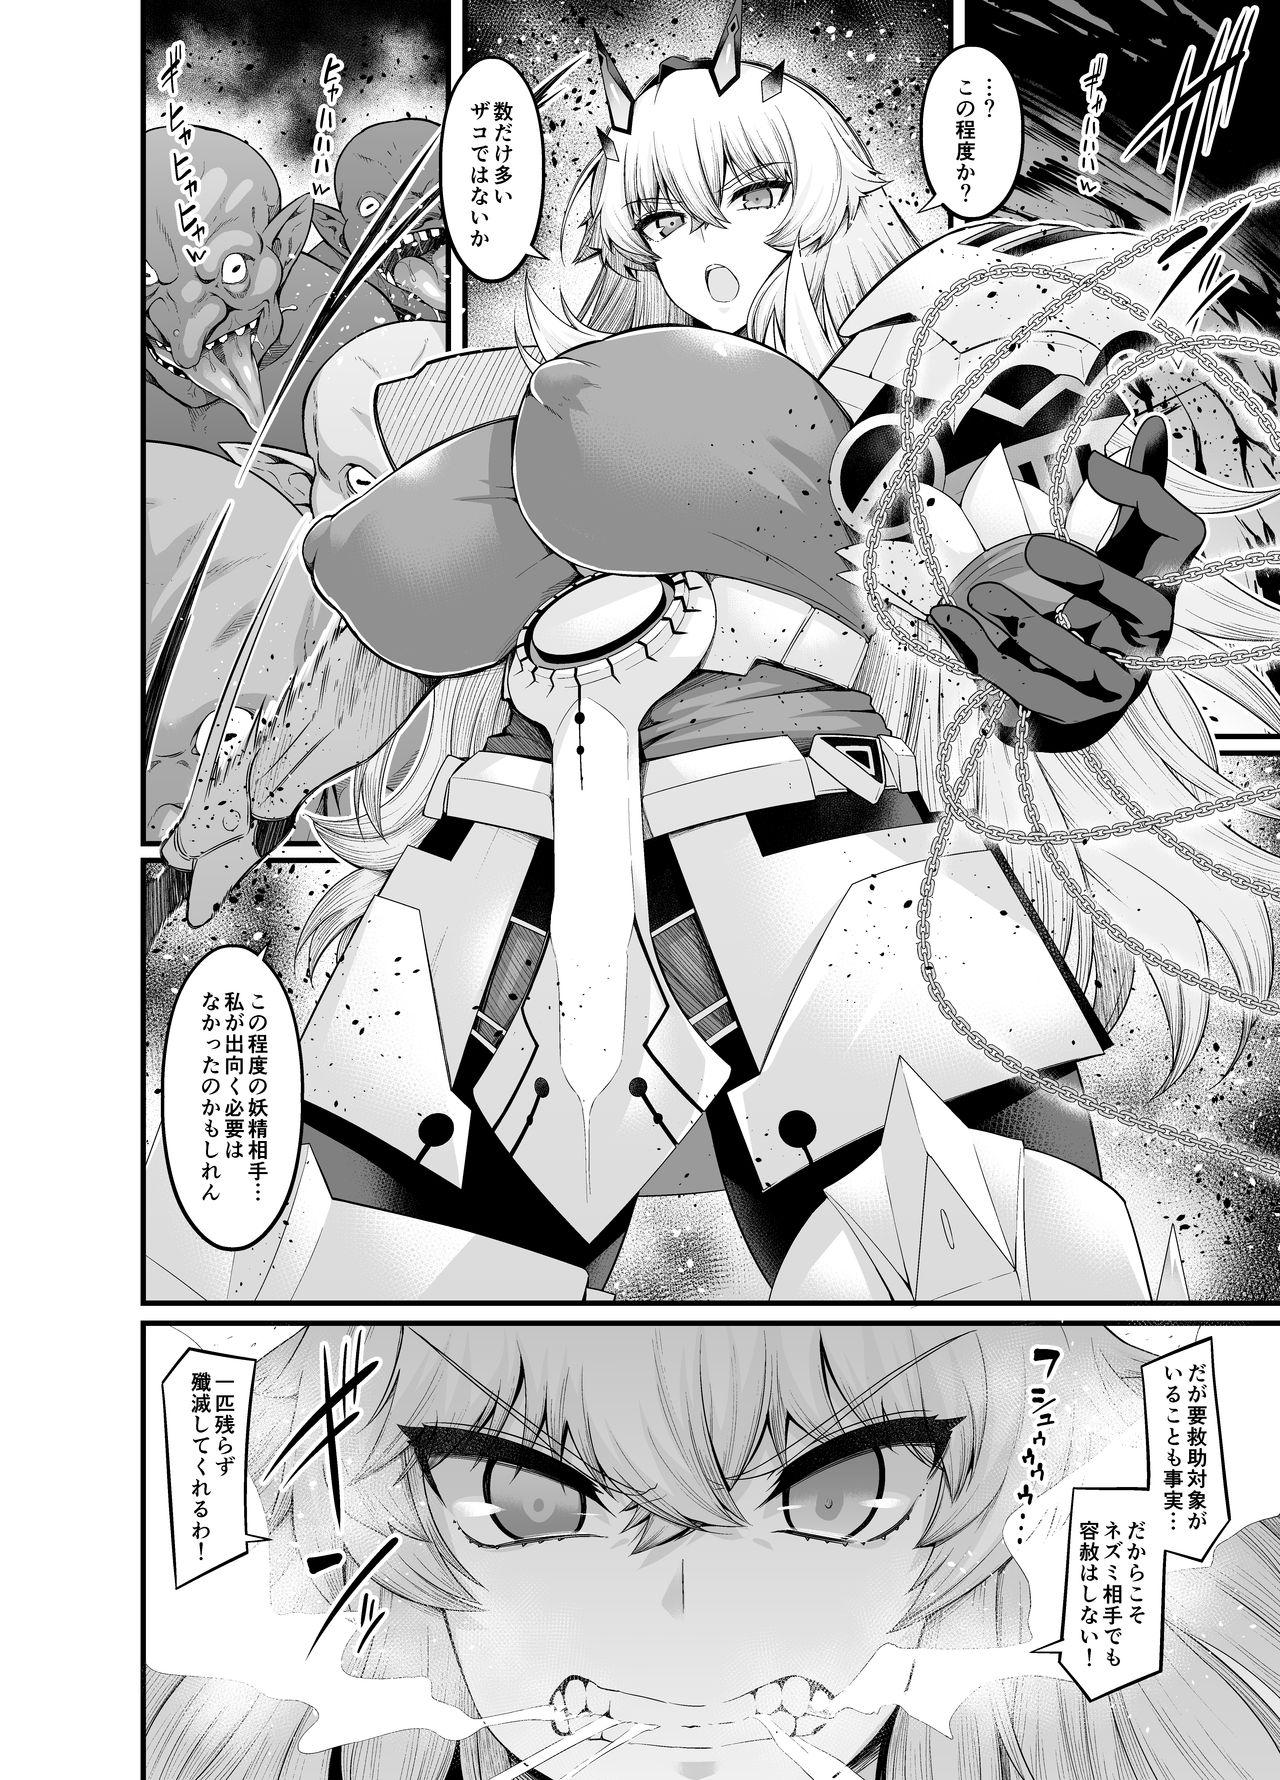 Pussylick Barghest vs Goblin - Fate grand order Femdom - Page 1